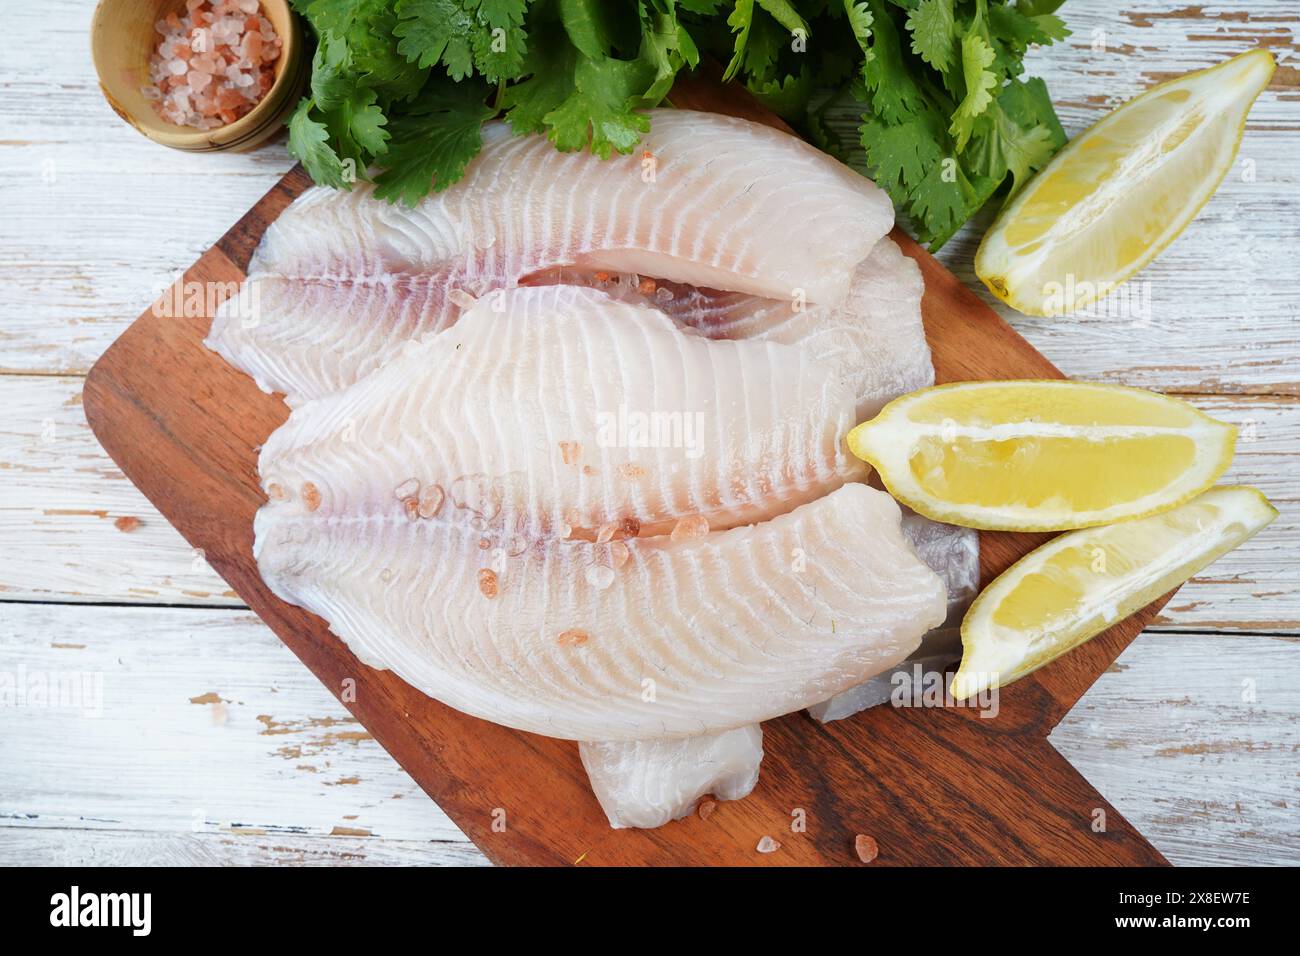 Fresh tilapia fish fillet sliced for steak or salad with herbs spices and lemon Stock Photo